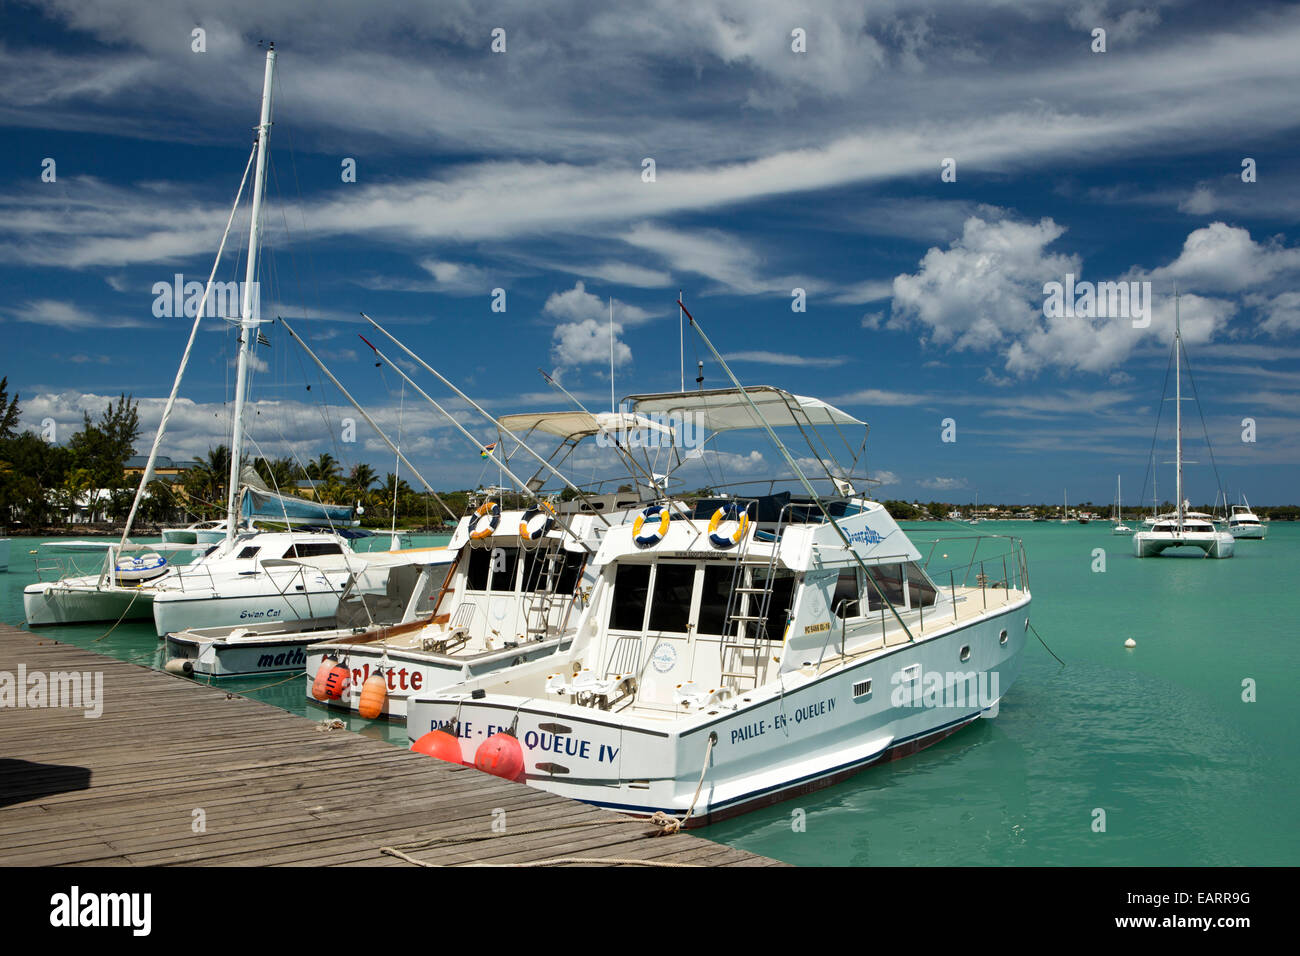 Mauritius, Grand Baie, public beach, big game fishing boats moored at jetty Stock Photo